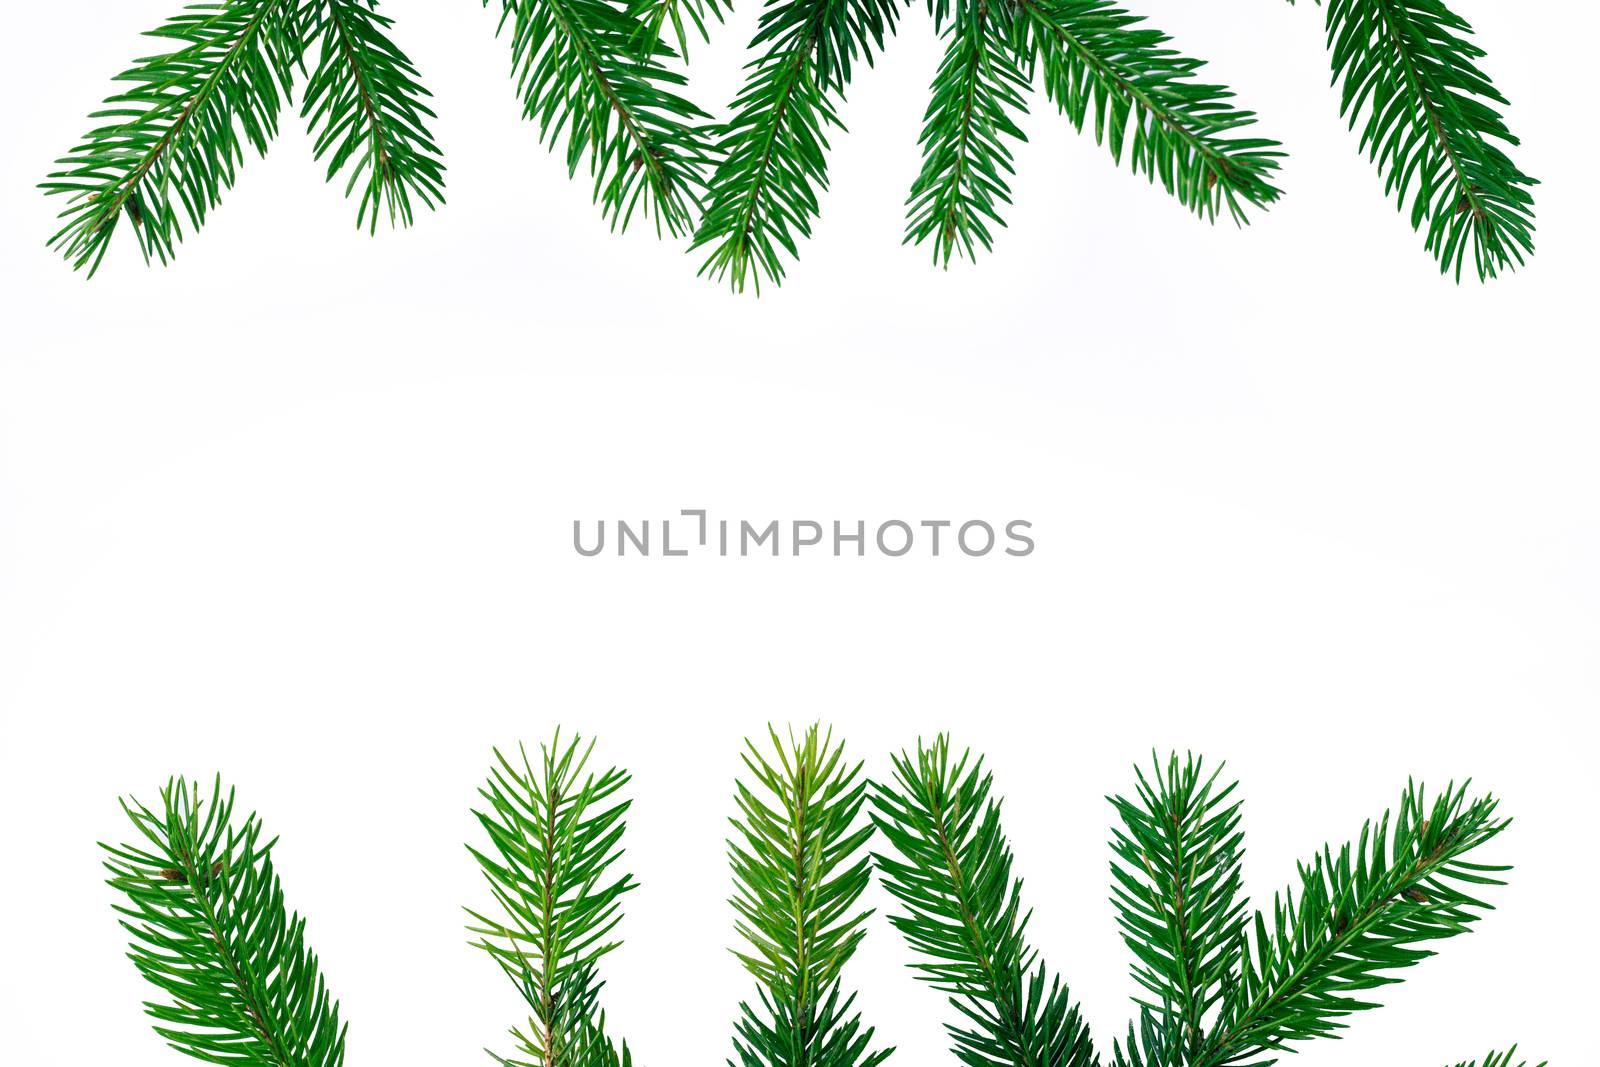 New year copyspace background, green contiferous fir tree branches frame